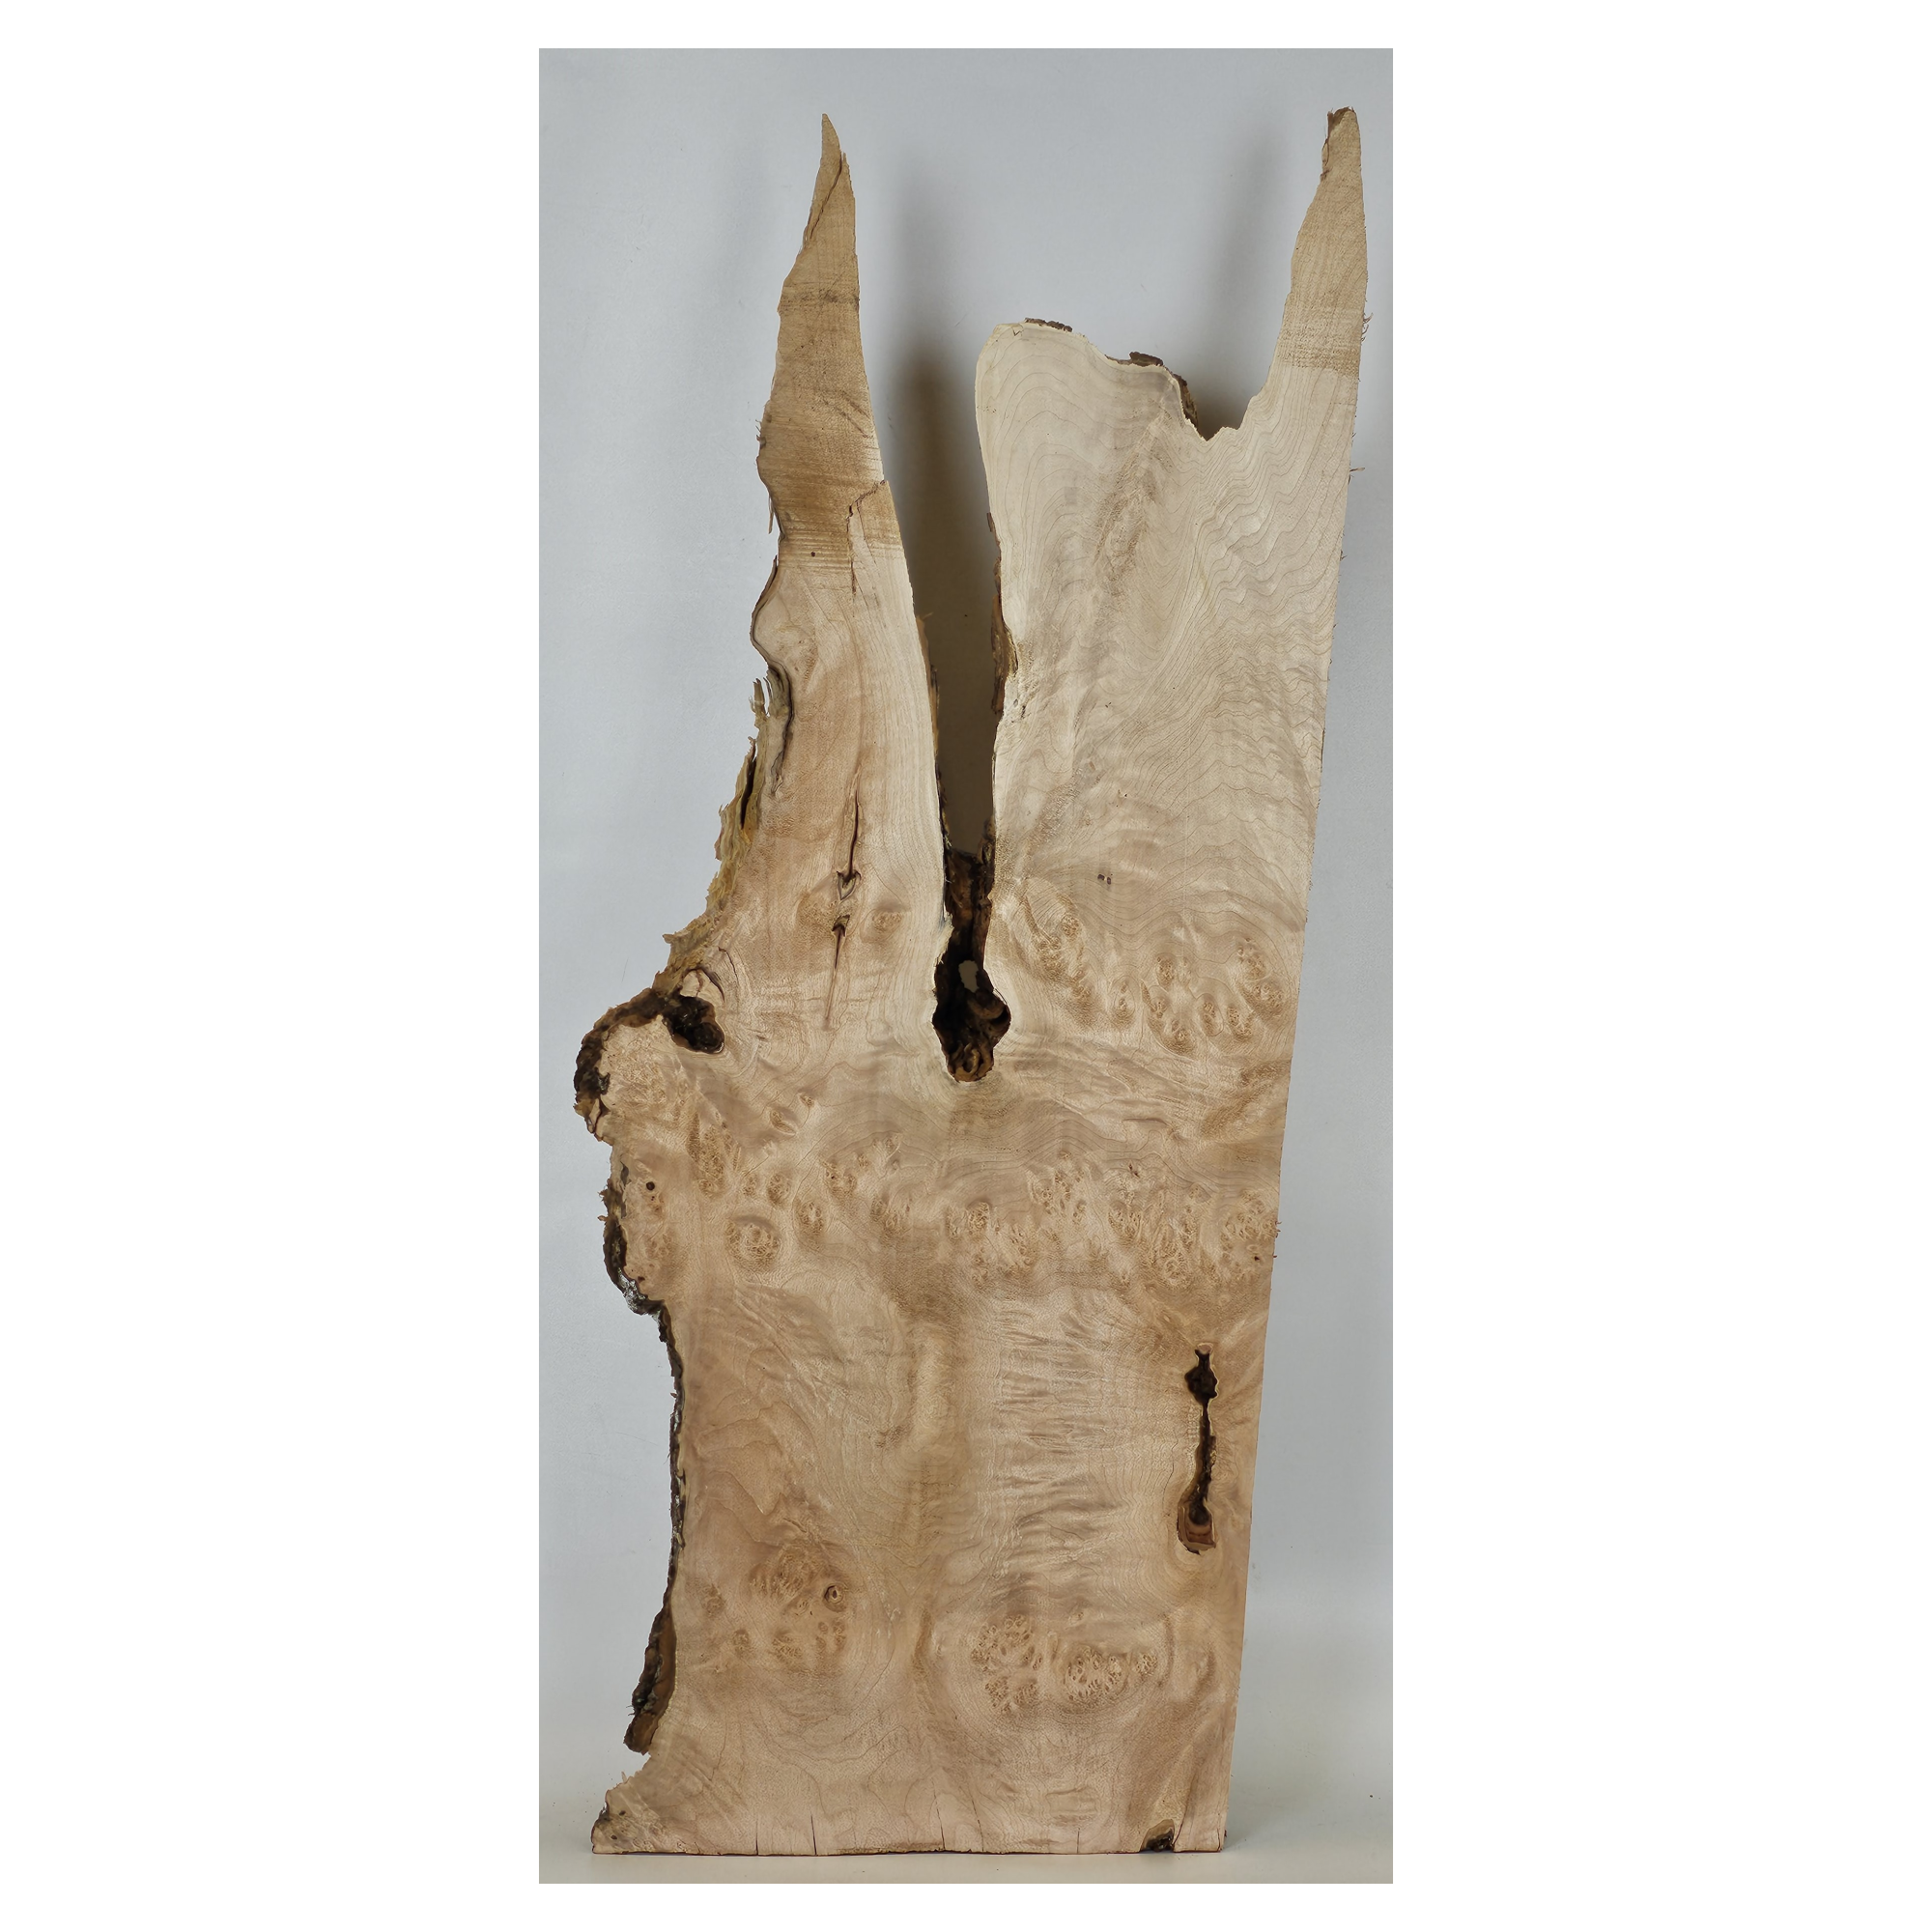 Gorgeous maple burl craft board with scattered burl eyes, interesting center void, wonderful shape and live edge.